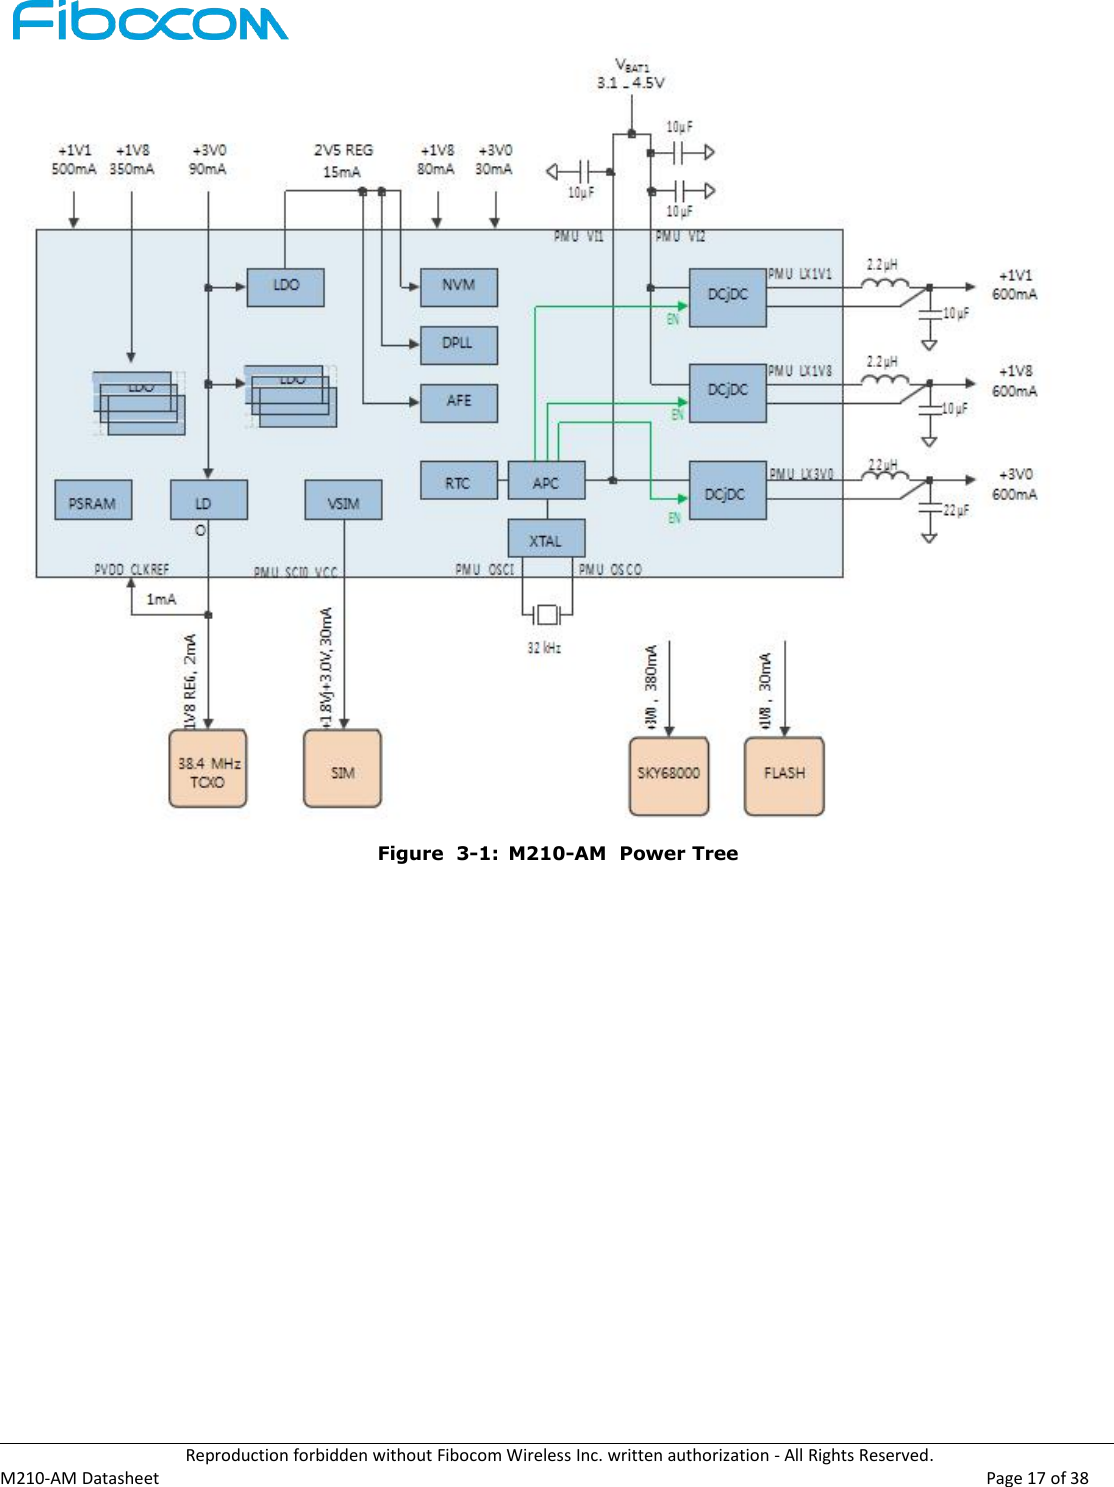 Reproduction forbidden without Fibocom Wireless Inc. written authorization - All Rights Reserved.M210-AM Datasheet Page 17 of 38Figure 3-1: M210-AM Power Tree